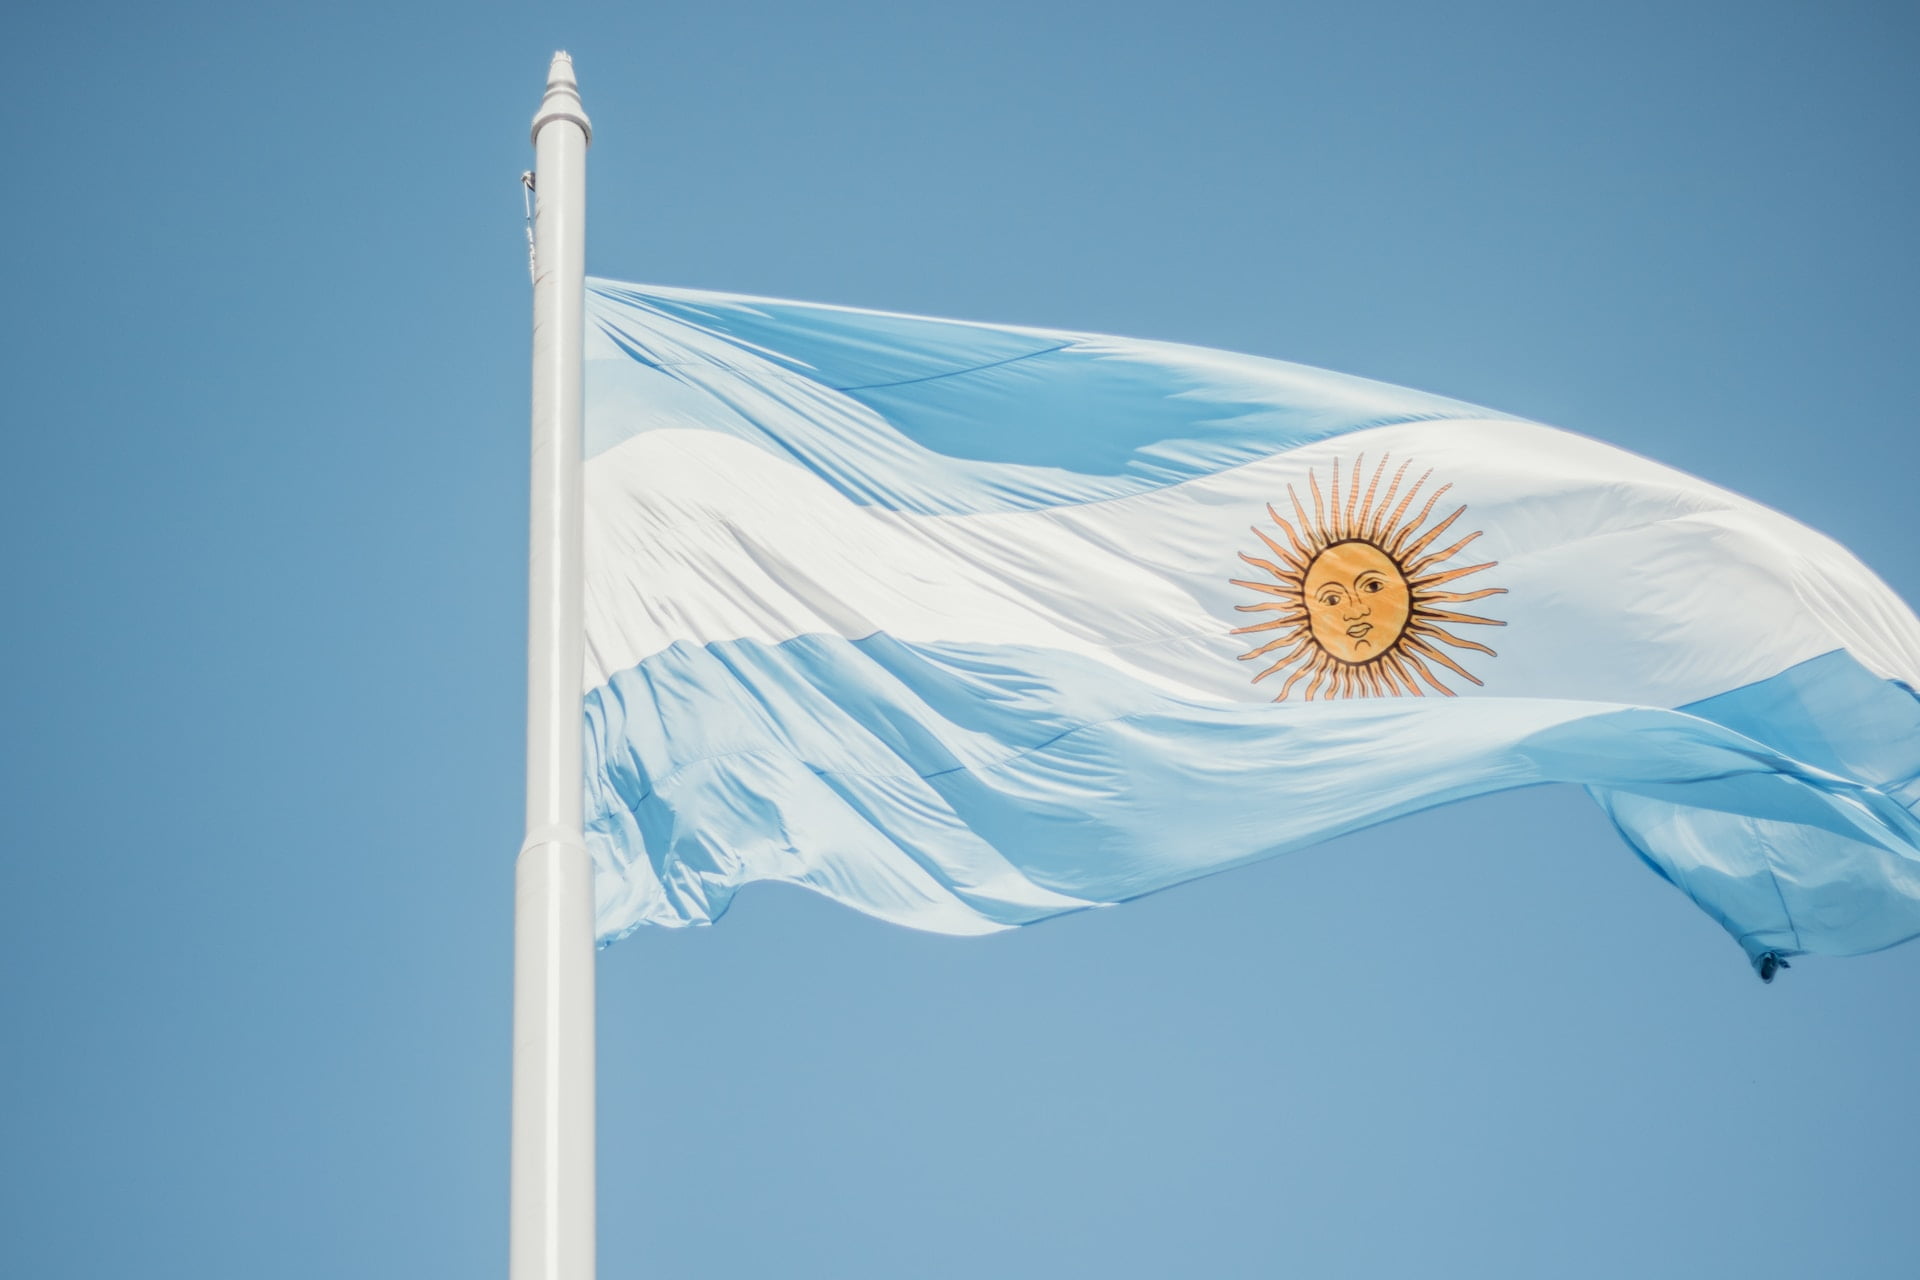 Bitcoin Advocate Javier Milei Triumphs in Argentina's Primary Election